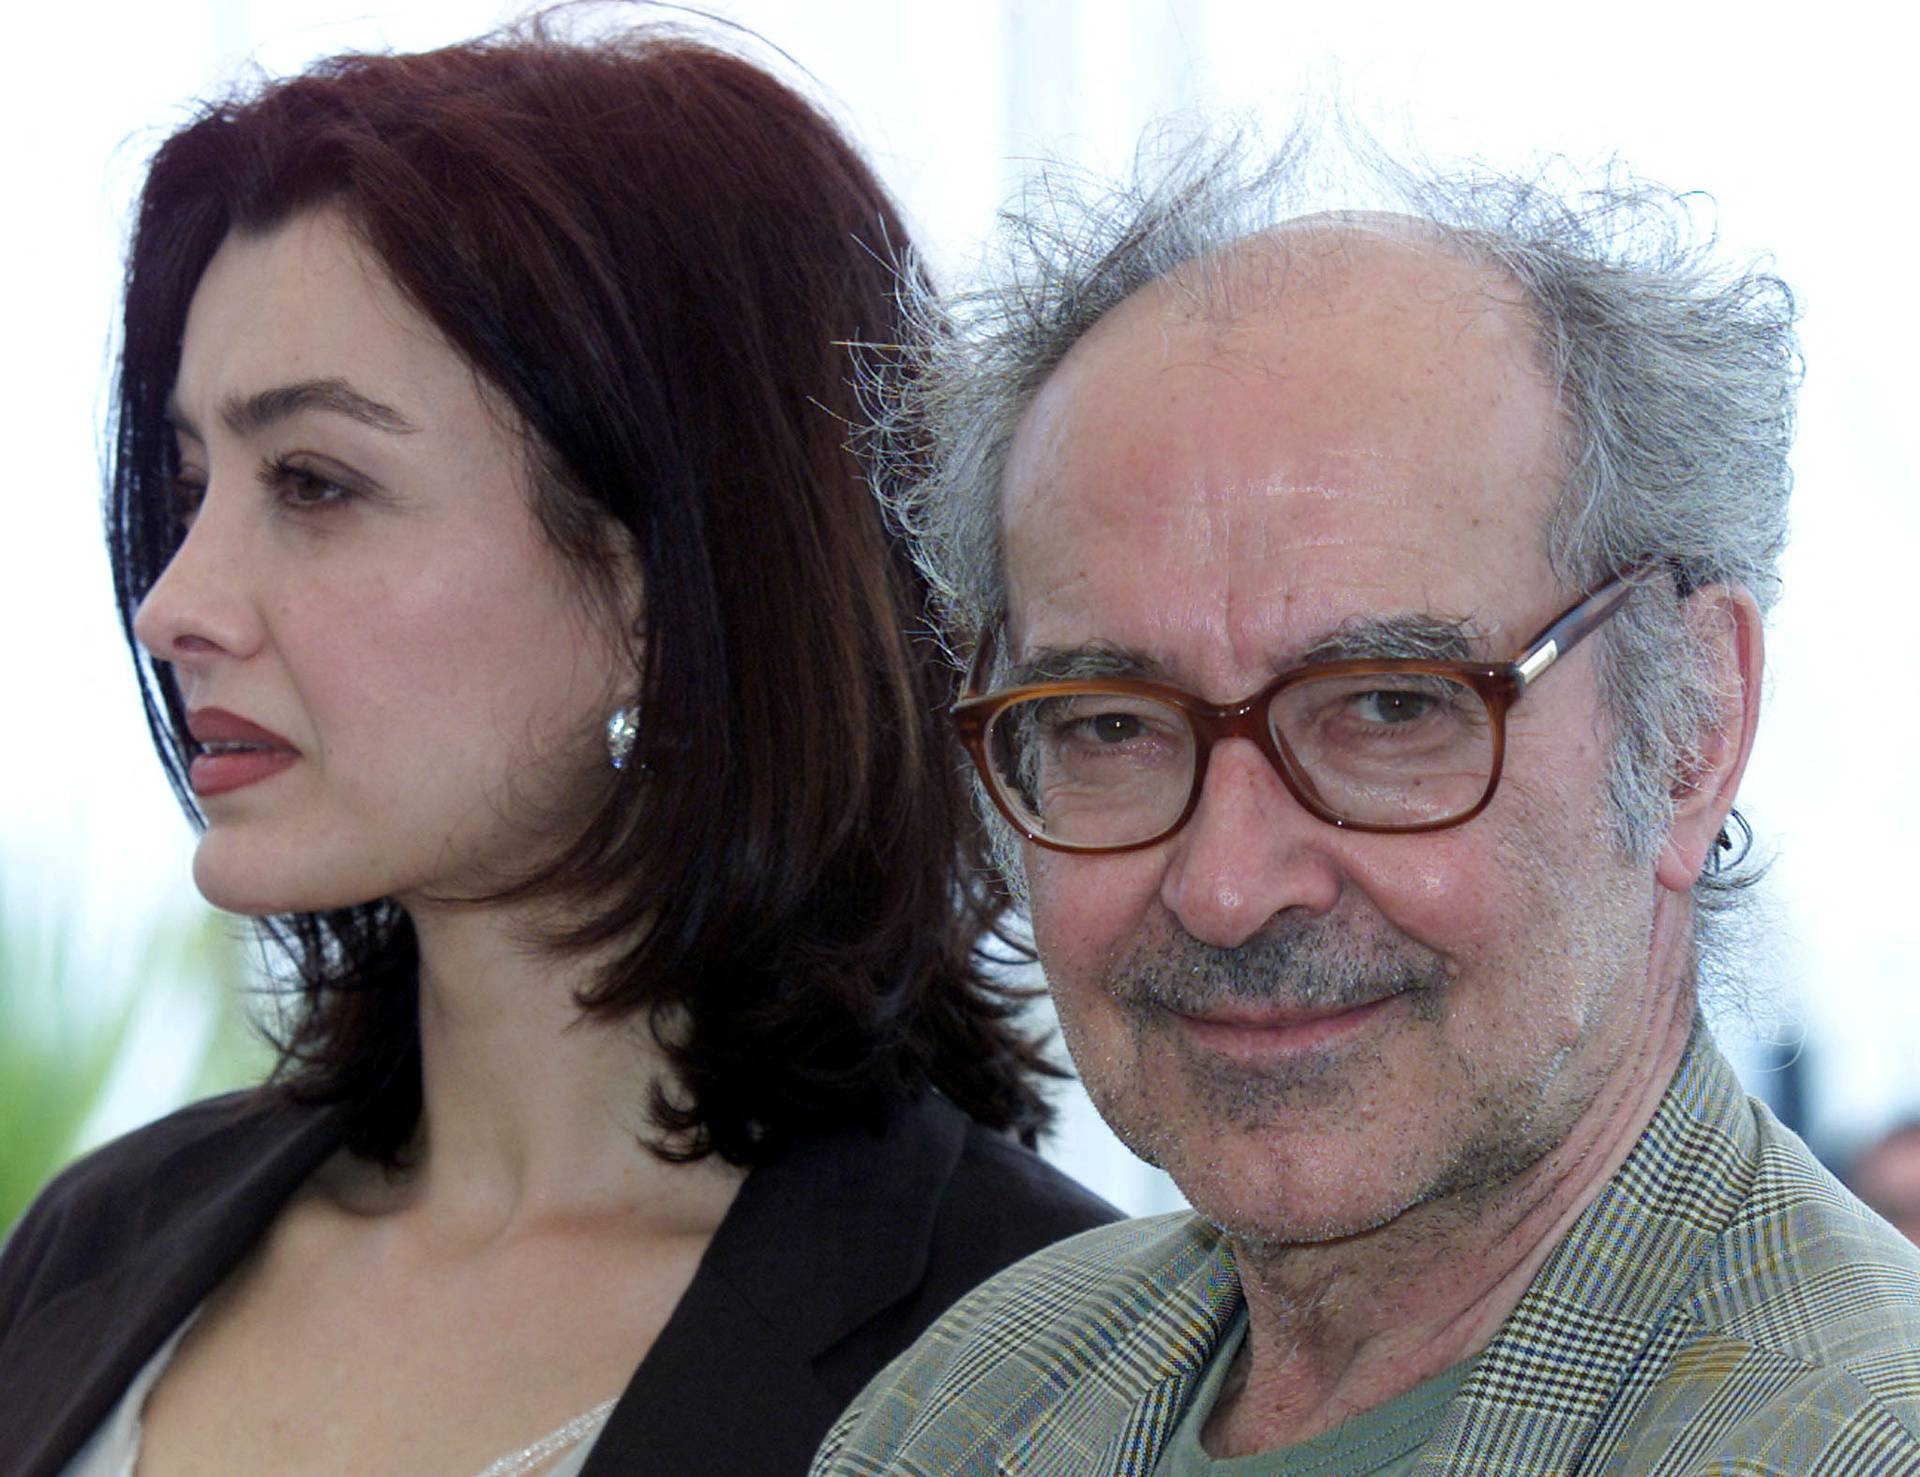 FILE PHOTO: Swiss director Jean Luc Godard (R) smiles as he stands with actress Cecile Camp (L) for their film "..